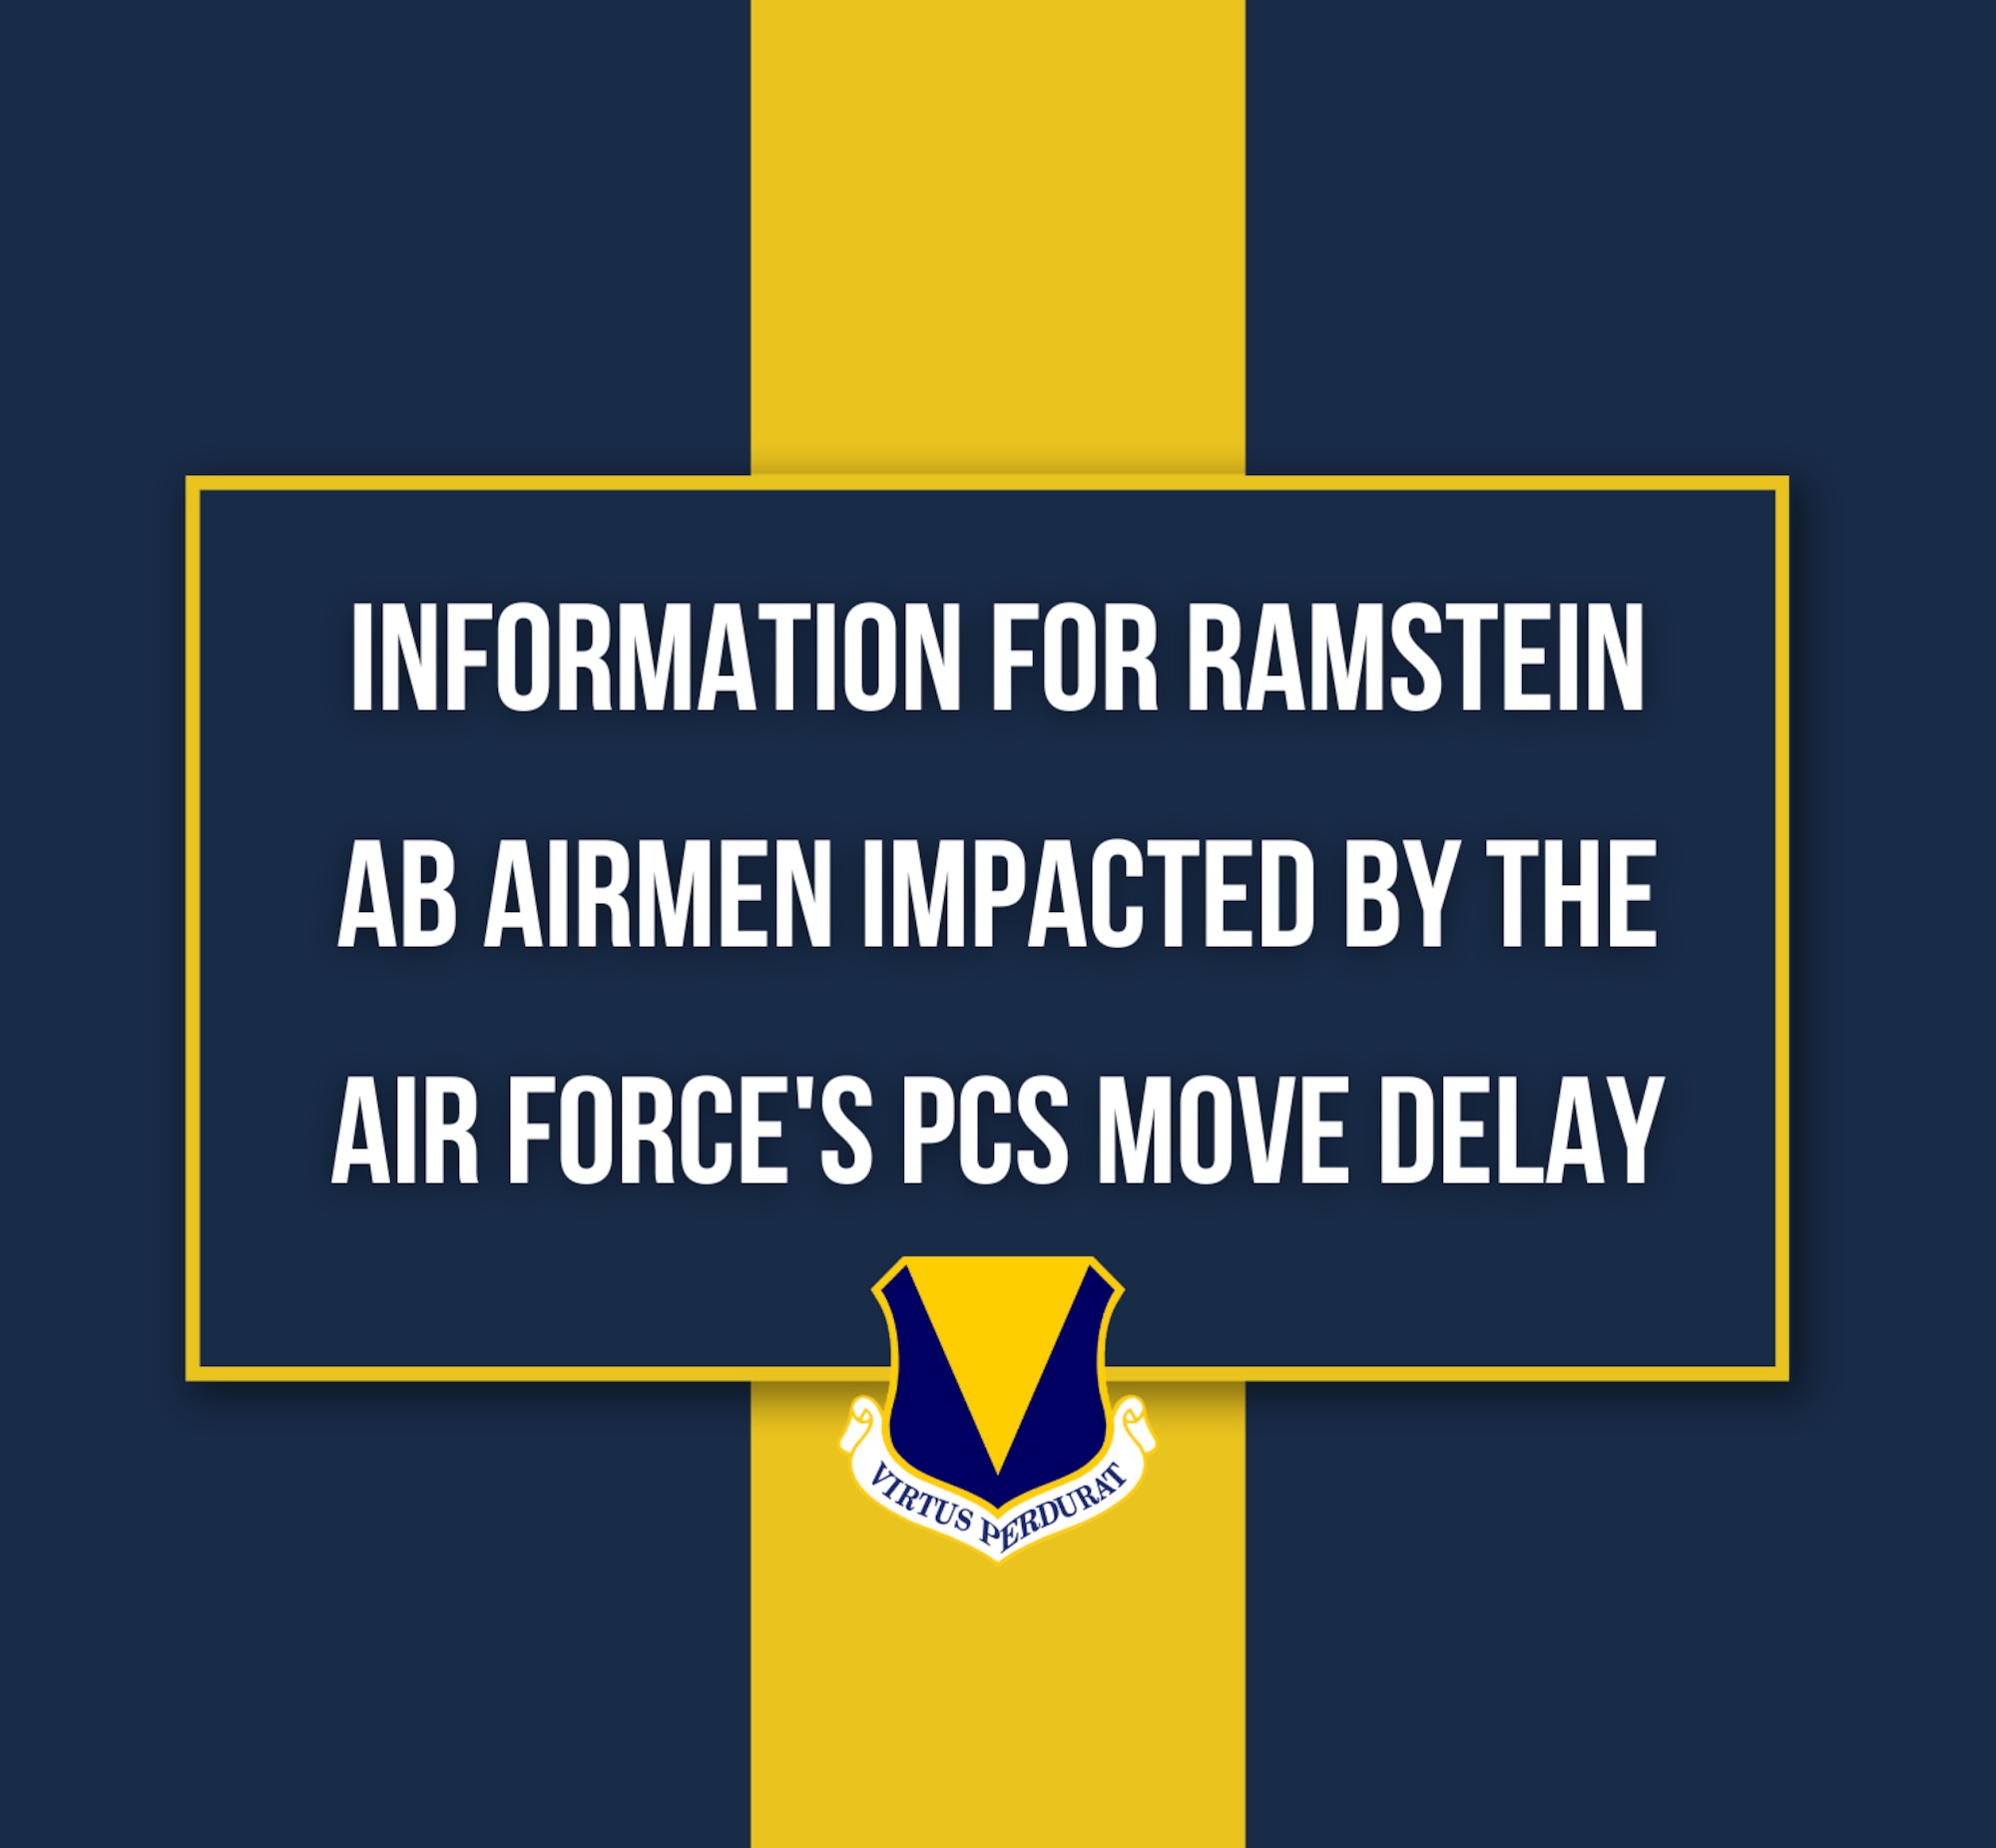 Airmen can find information on the AF-wide PCS moves delay can get information here